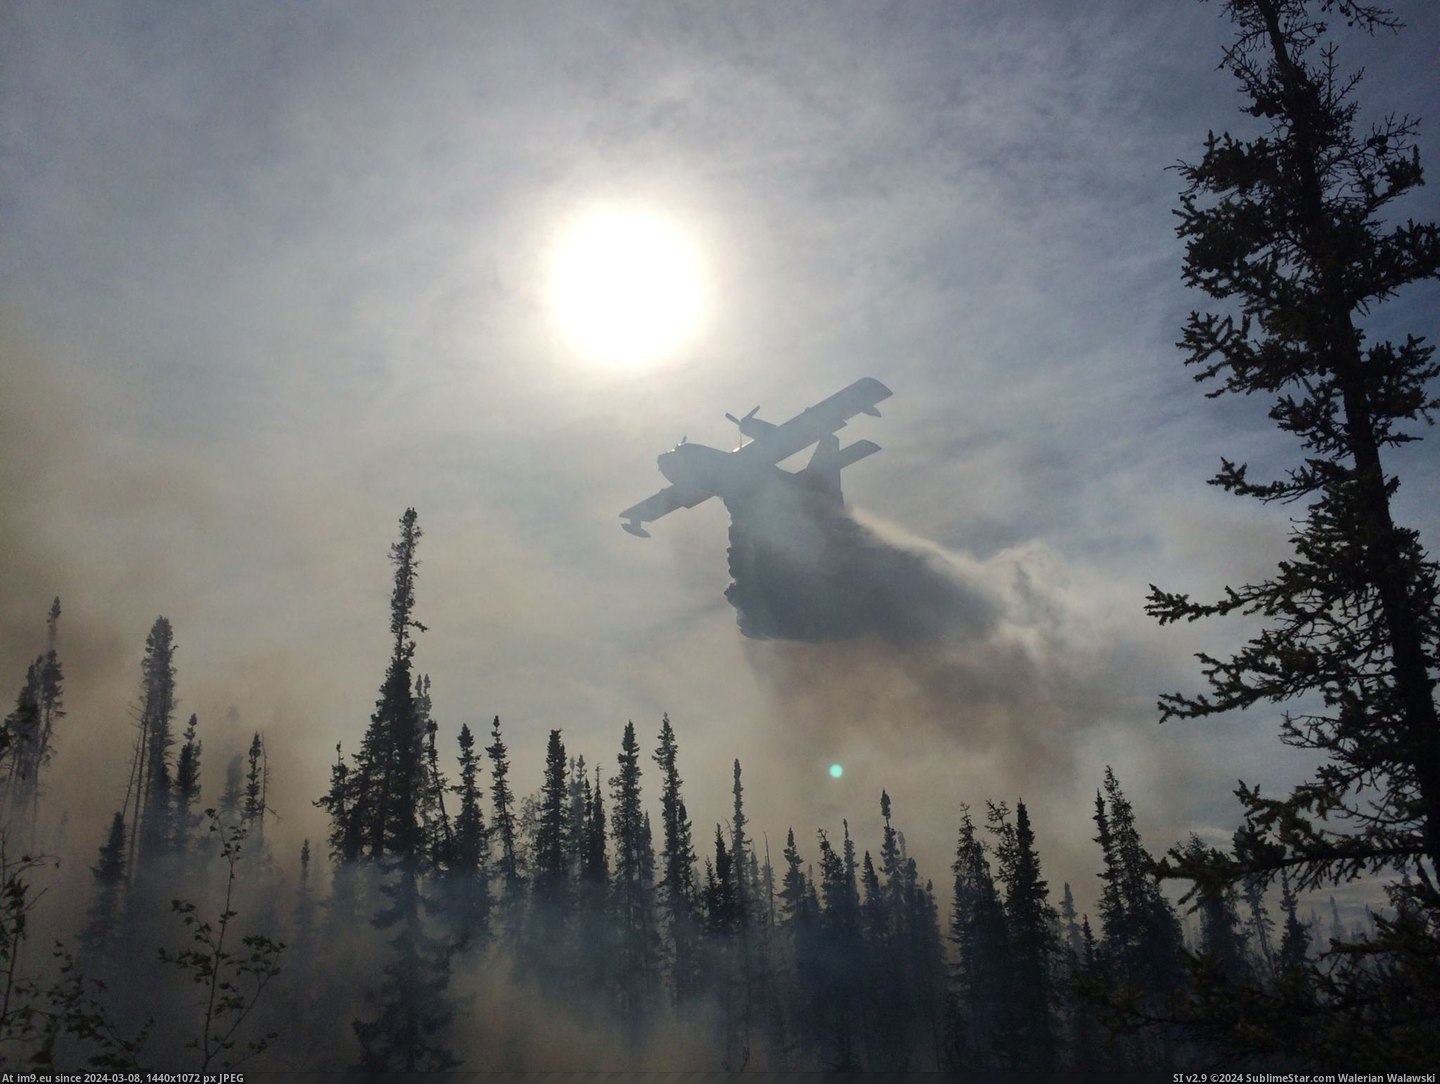 #Fire #Fighting #Fairbanks #Cousin [Pics] My cousin took this while fighting a fire outside of Fairbanks, AK Pic. (Image of album My r/PICS favs))